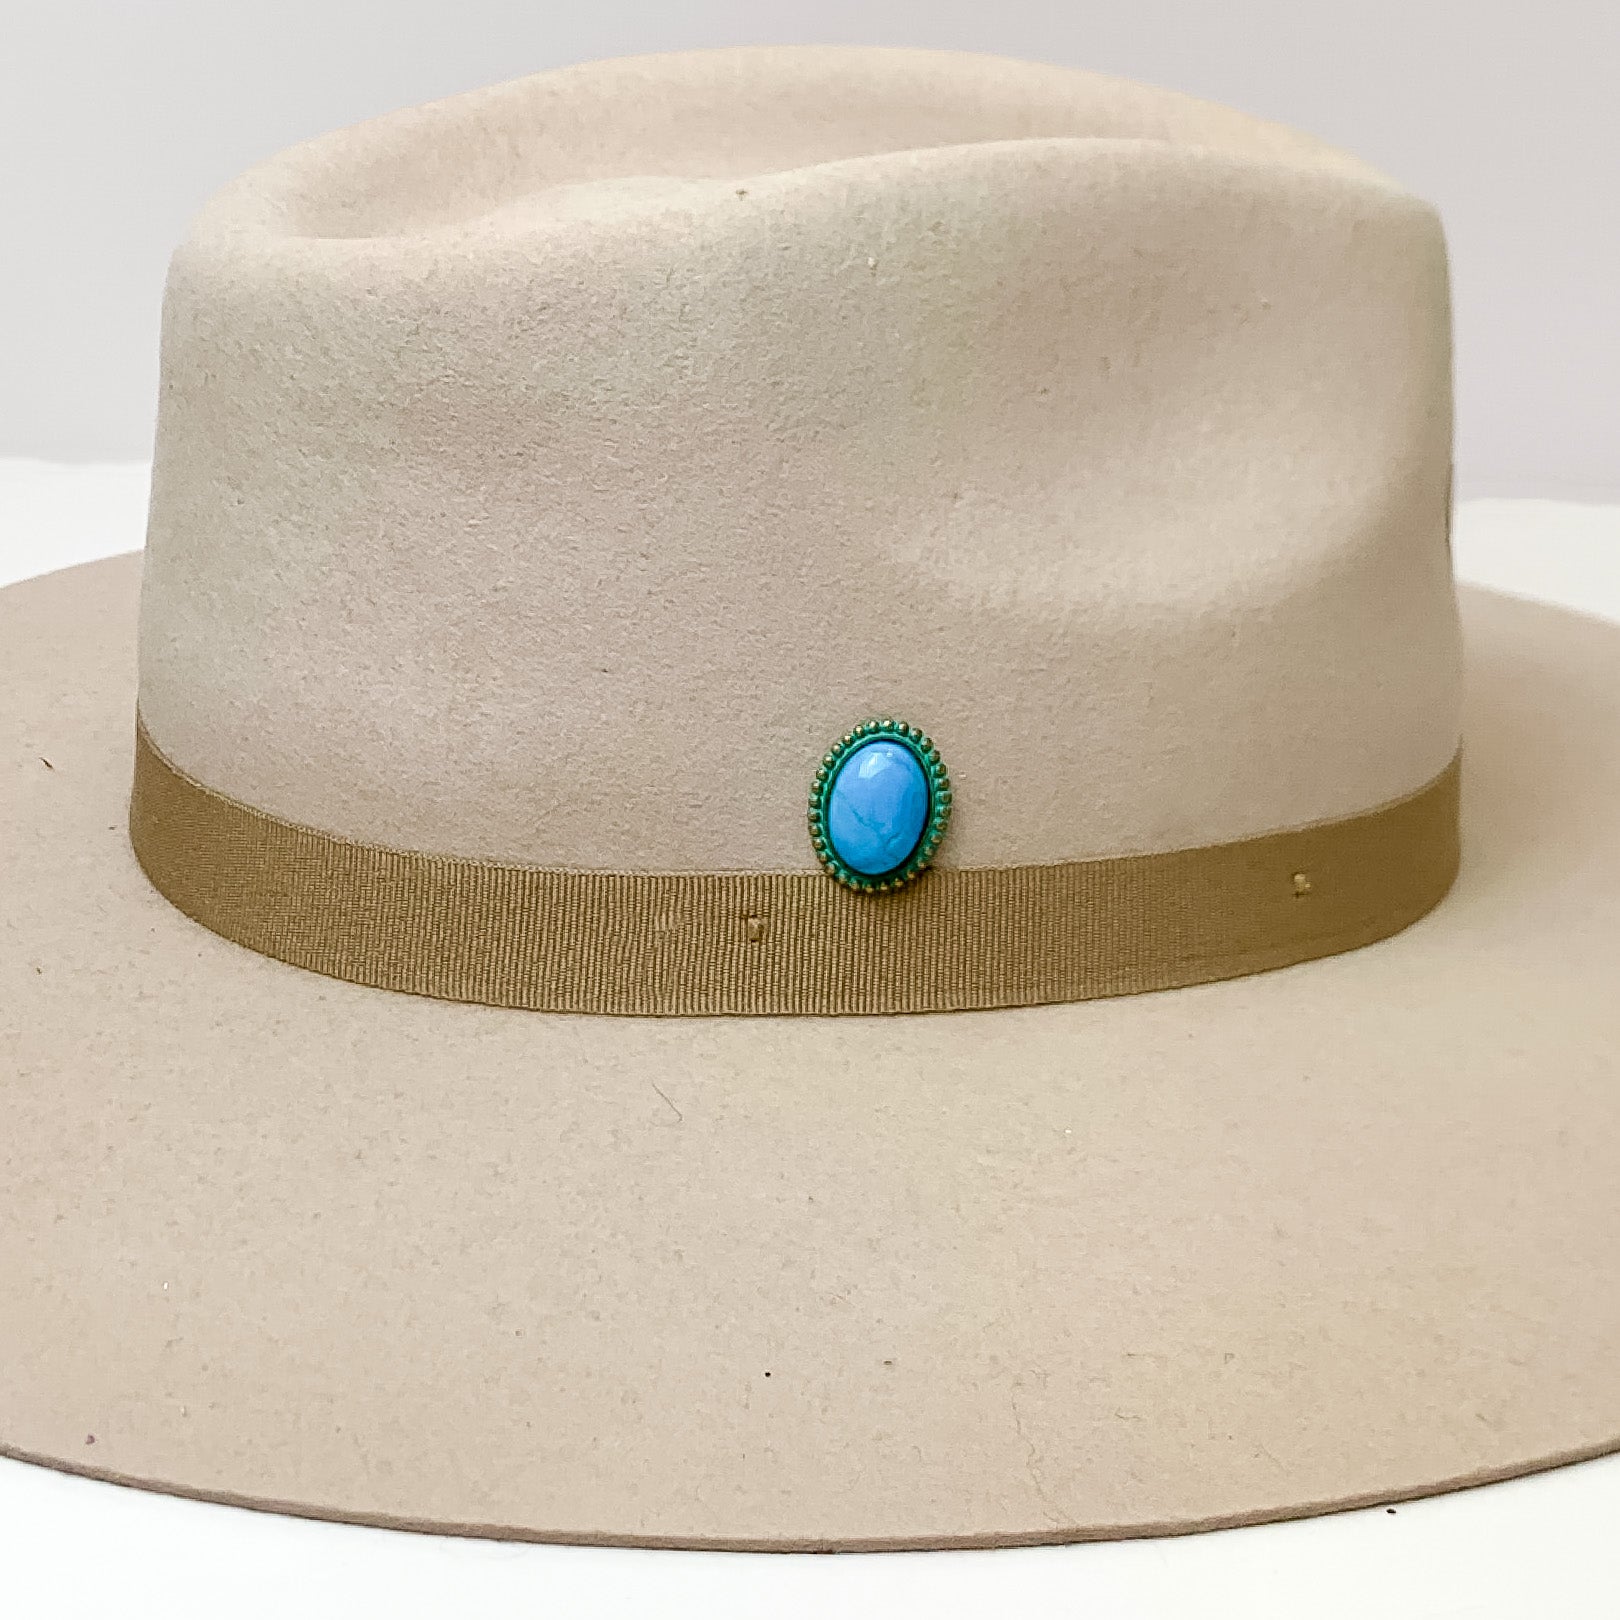 Pink Panache | Patina Tone Oval Hat Pin with Turquoise Cabochon Stone - Giddy Up Glamour Boutique